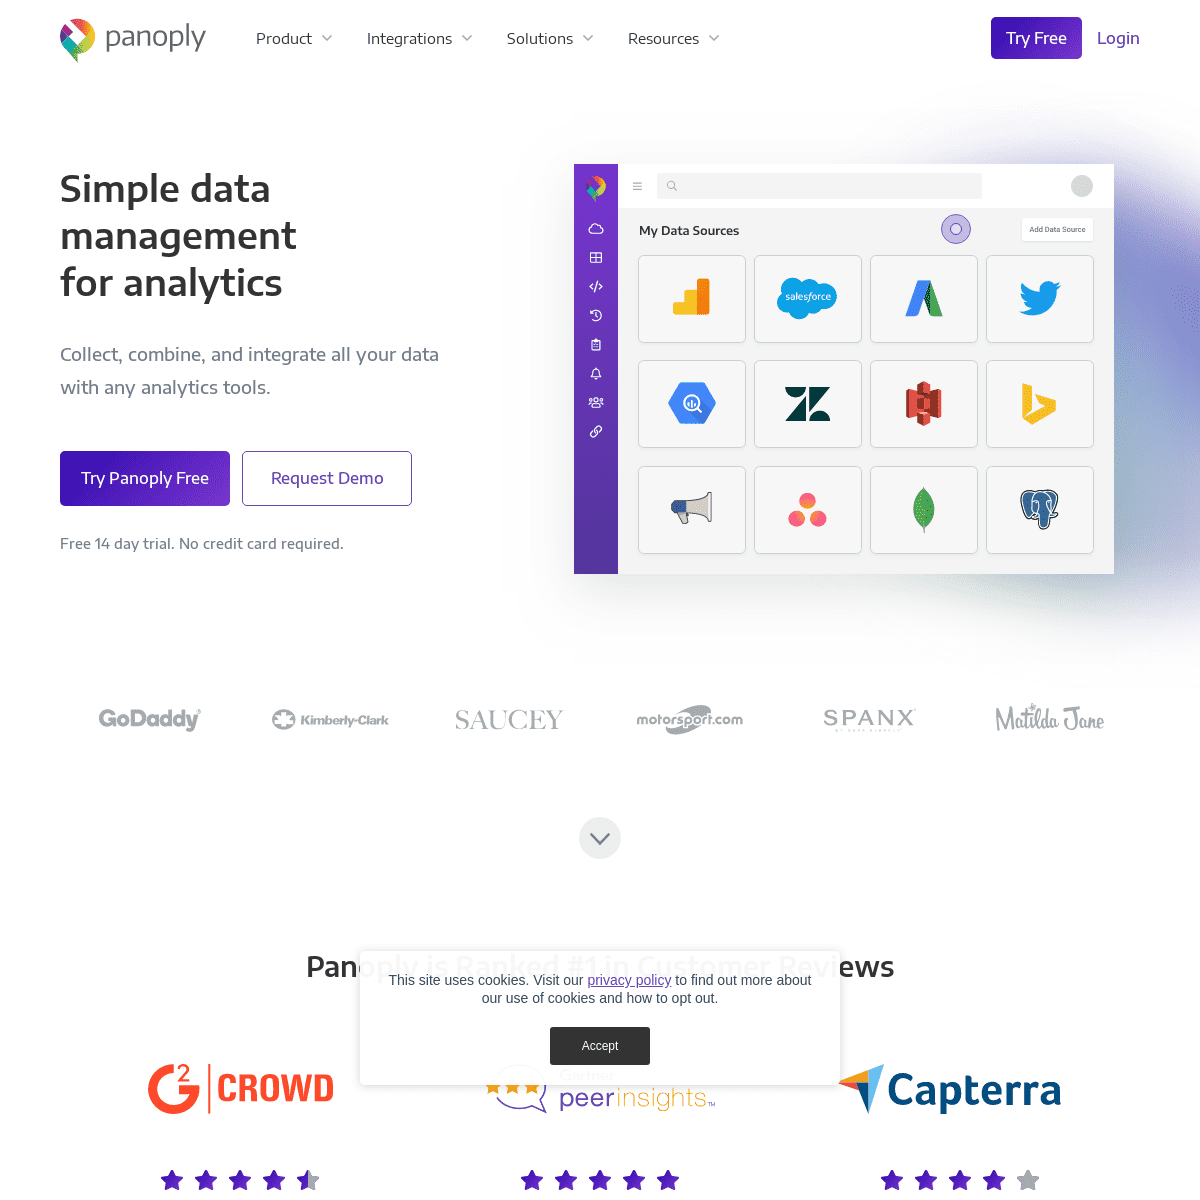 A complete backup of panoply.io